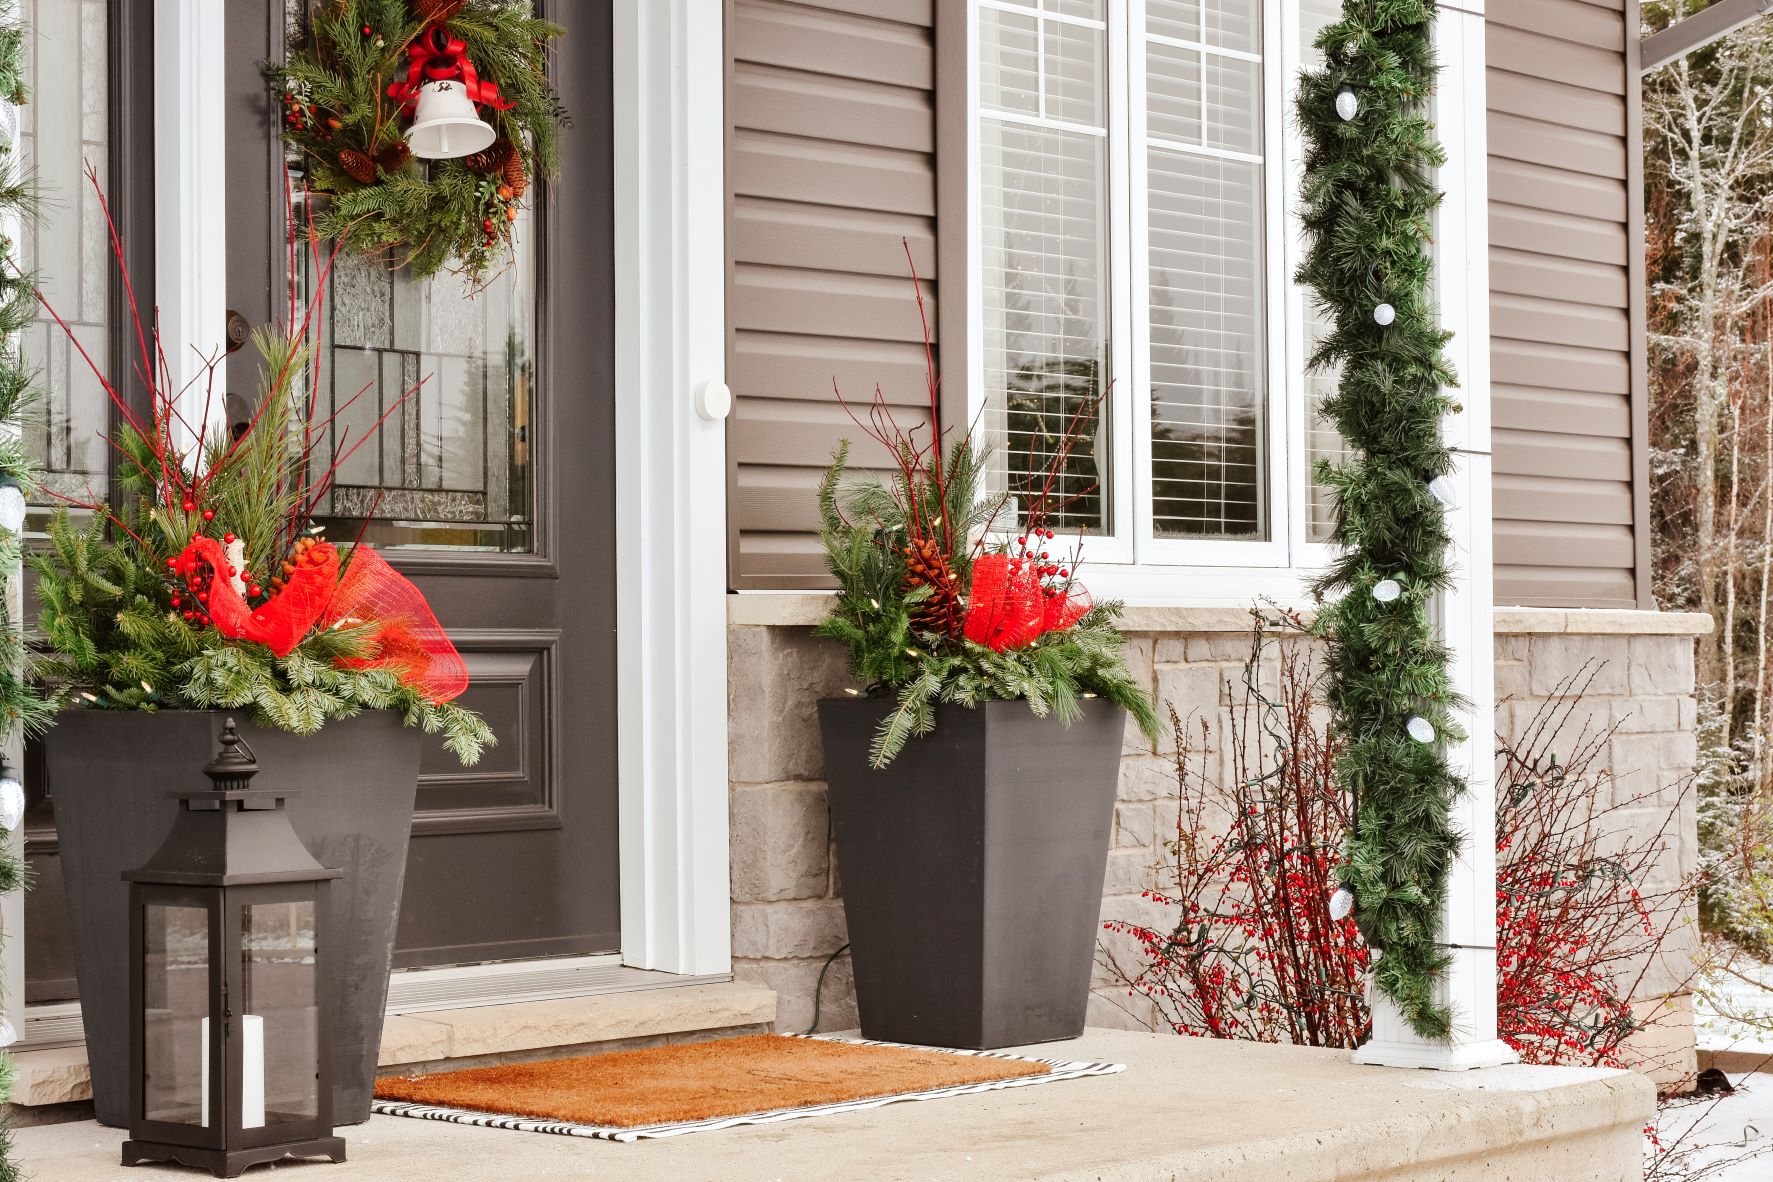 6 Easy Ideas to Add Holiday Cheer to Your Front Porch